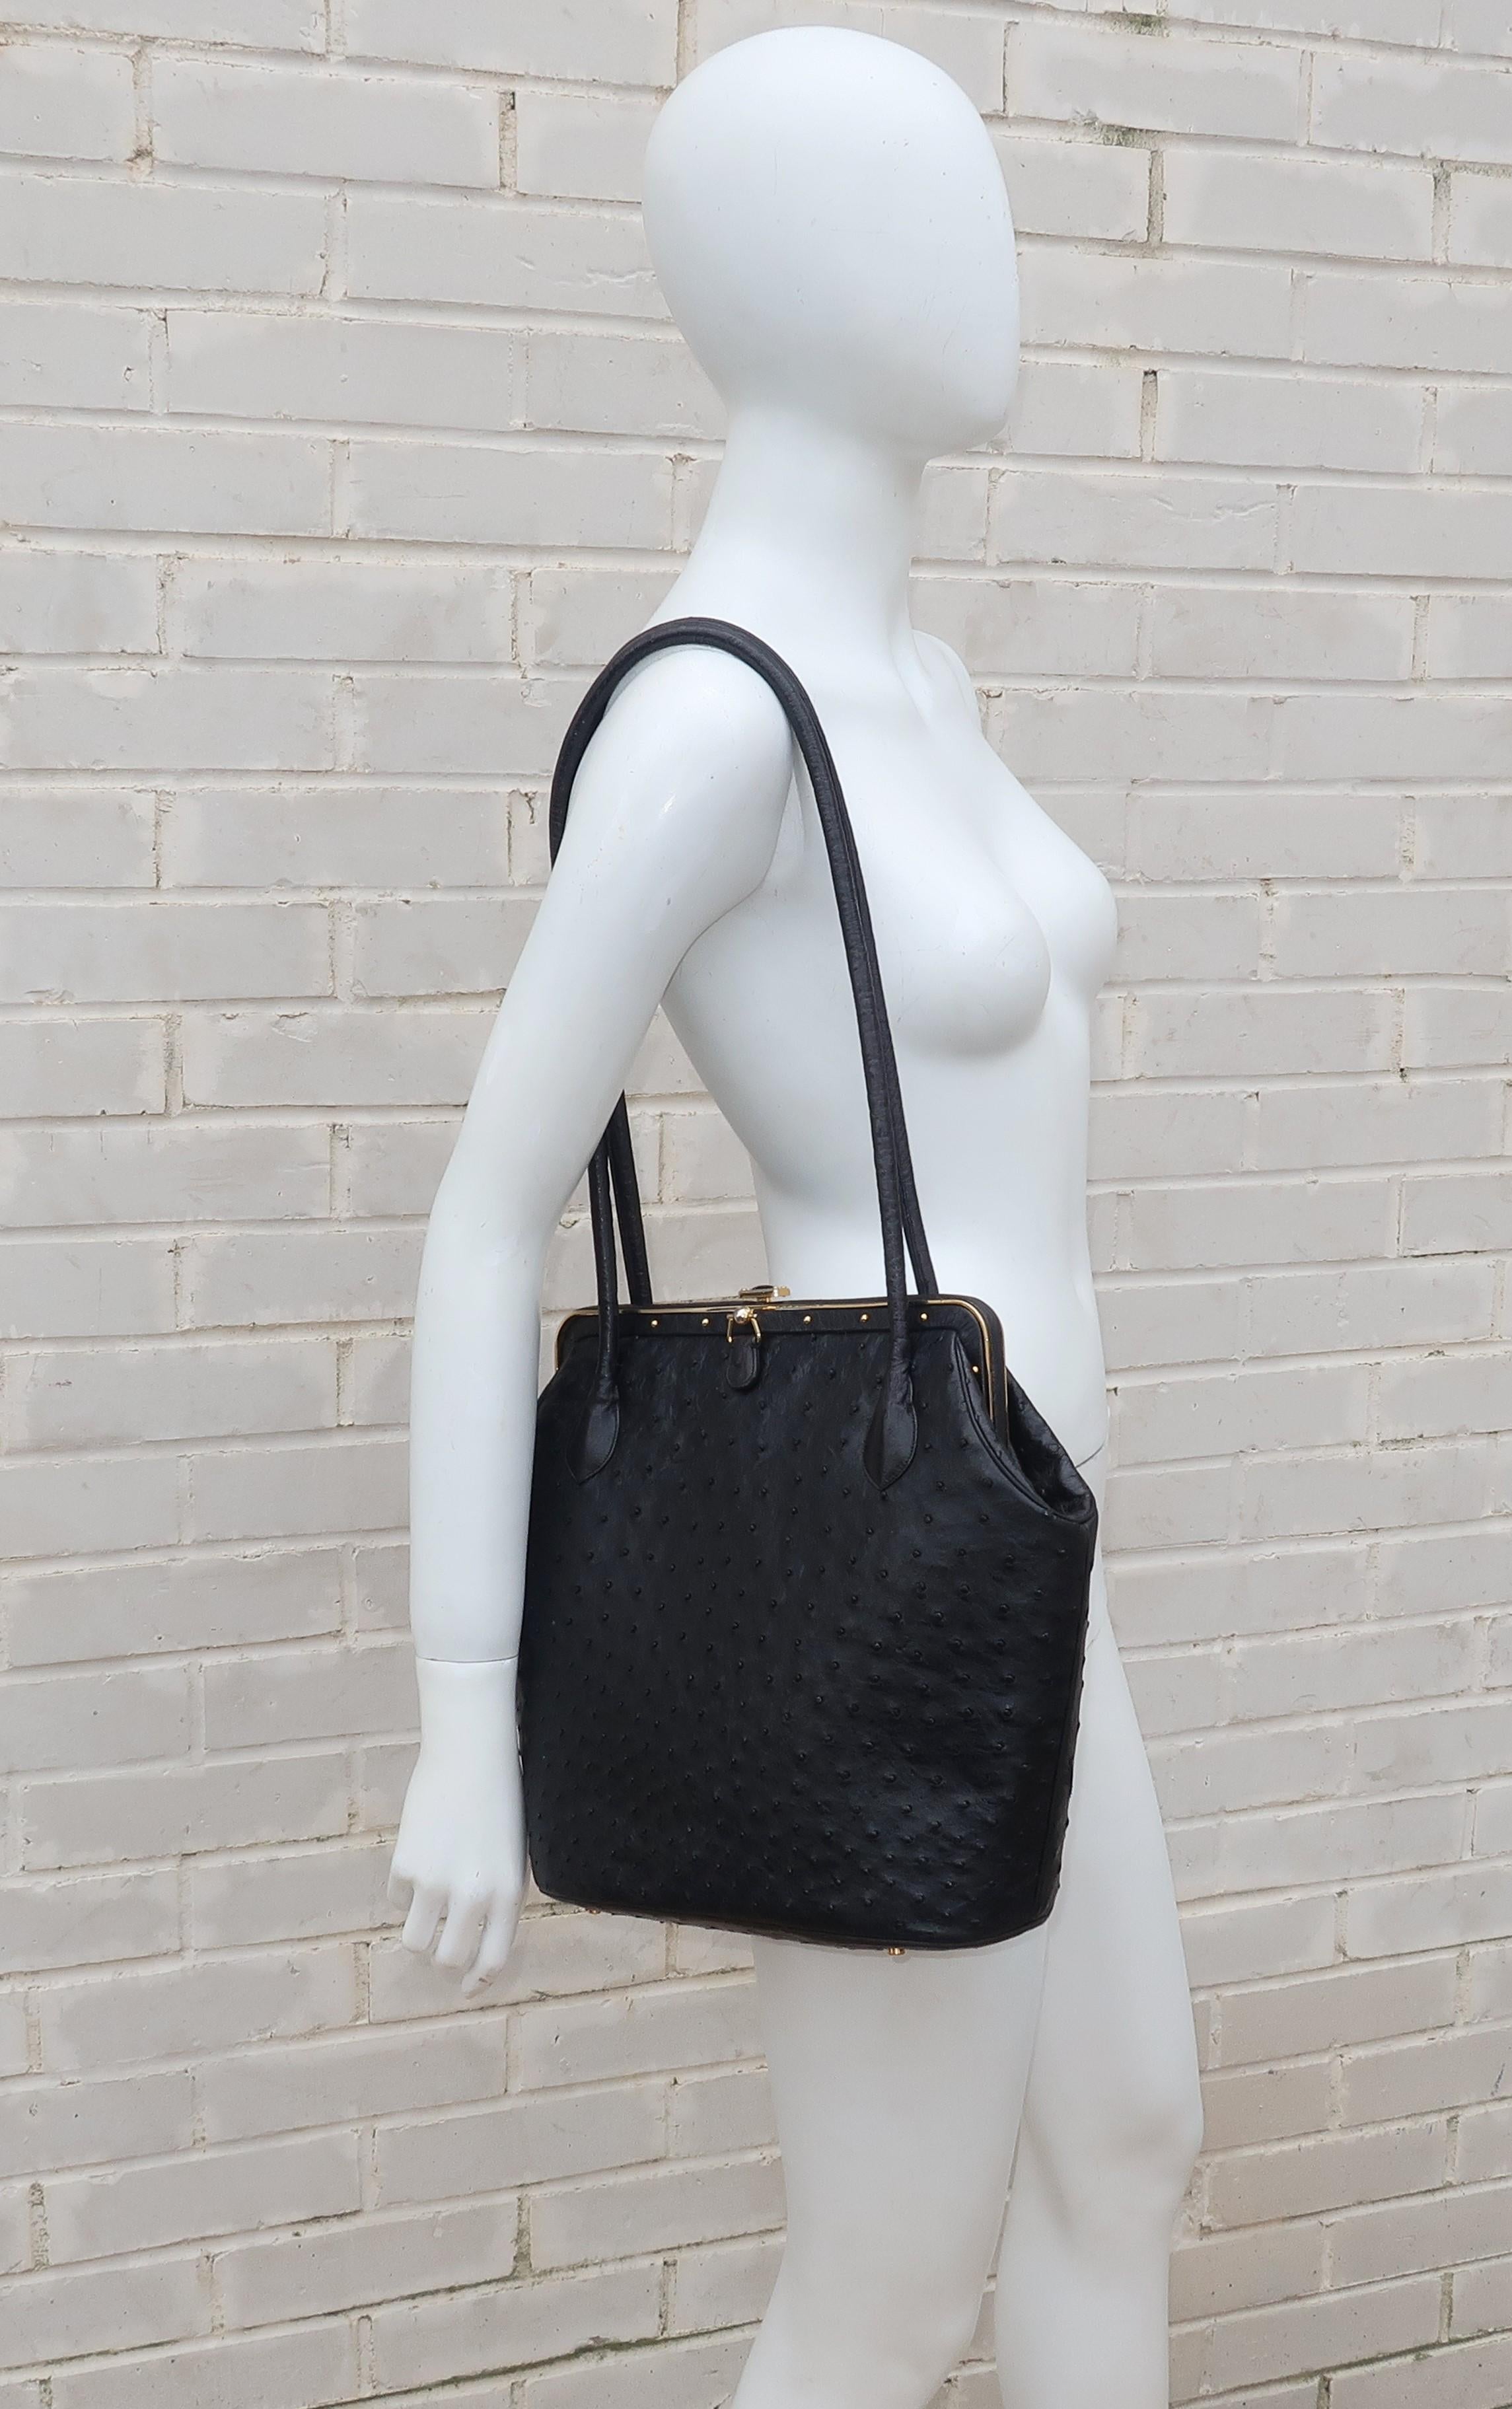 This fabulous Judith Leiber black ostrich handbag is both uncharacteristically large and a little edgy as compared to Leiber's other designs.  The body of the handbag measures 11.5